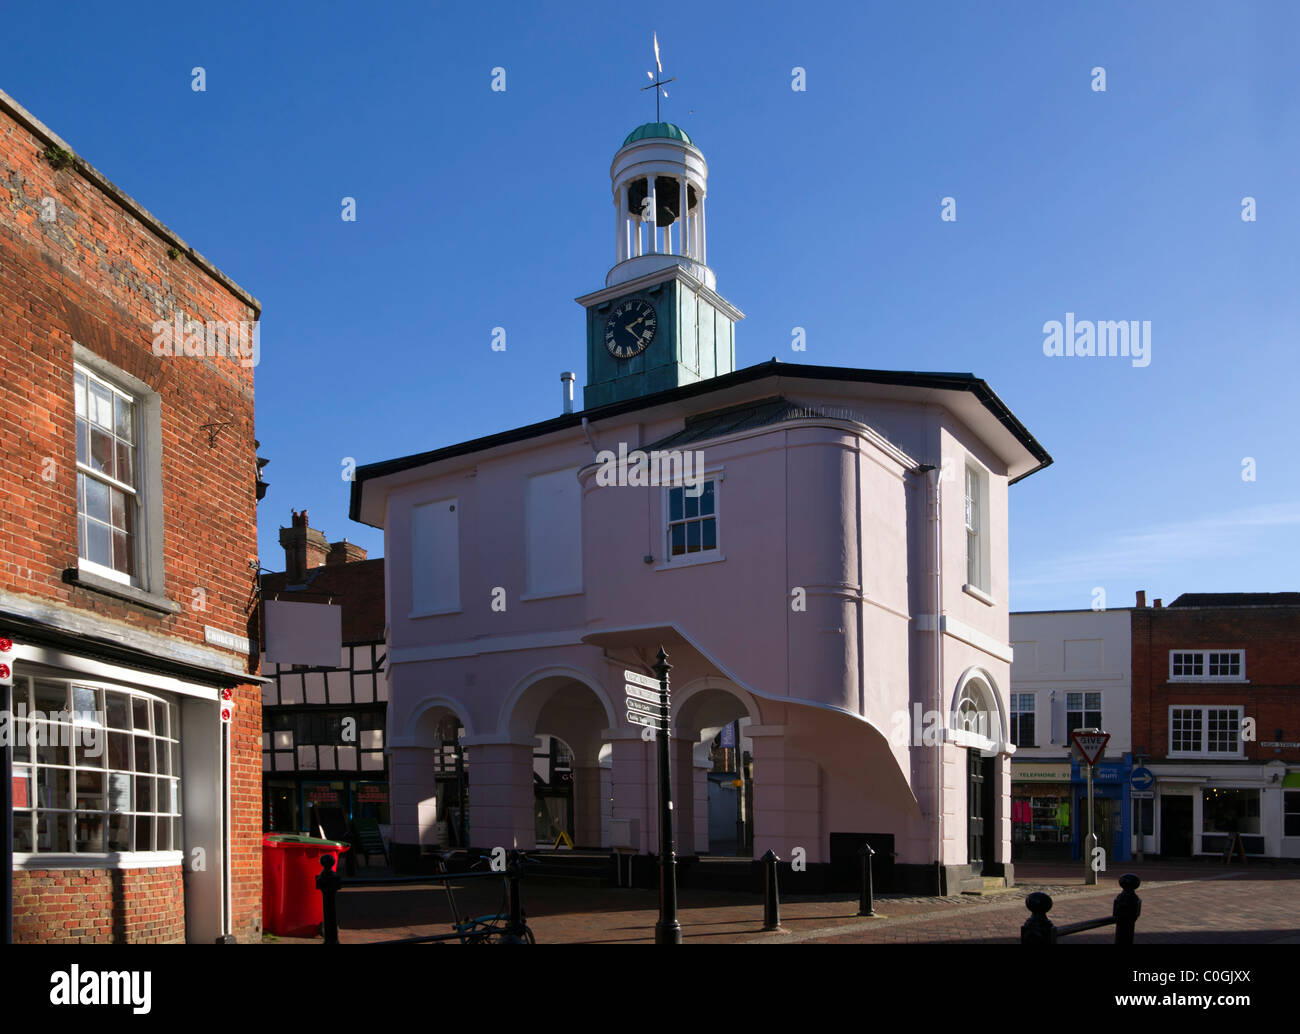 Pepperpot, old town hall, Godalming Foto Stock